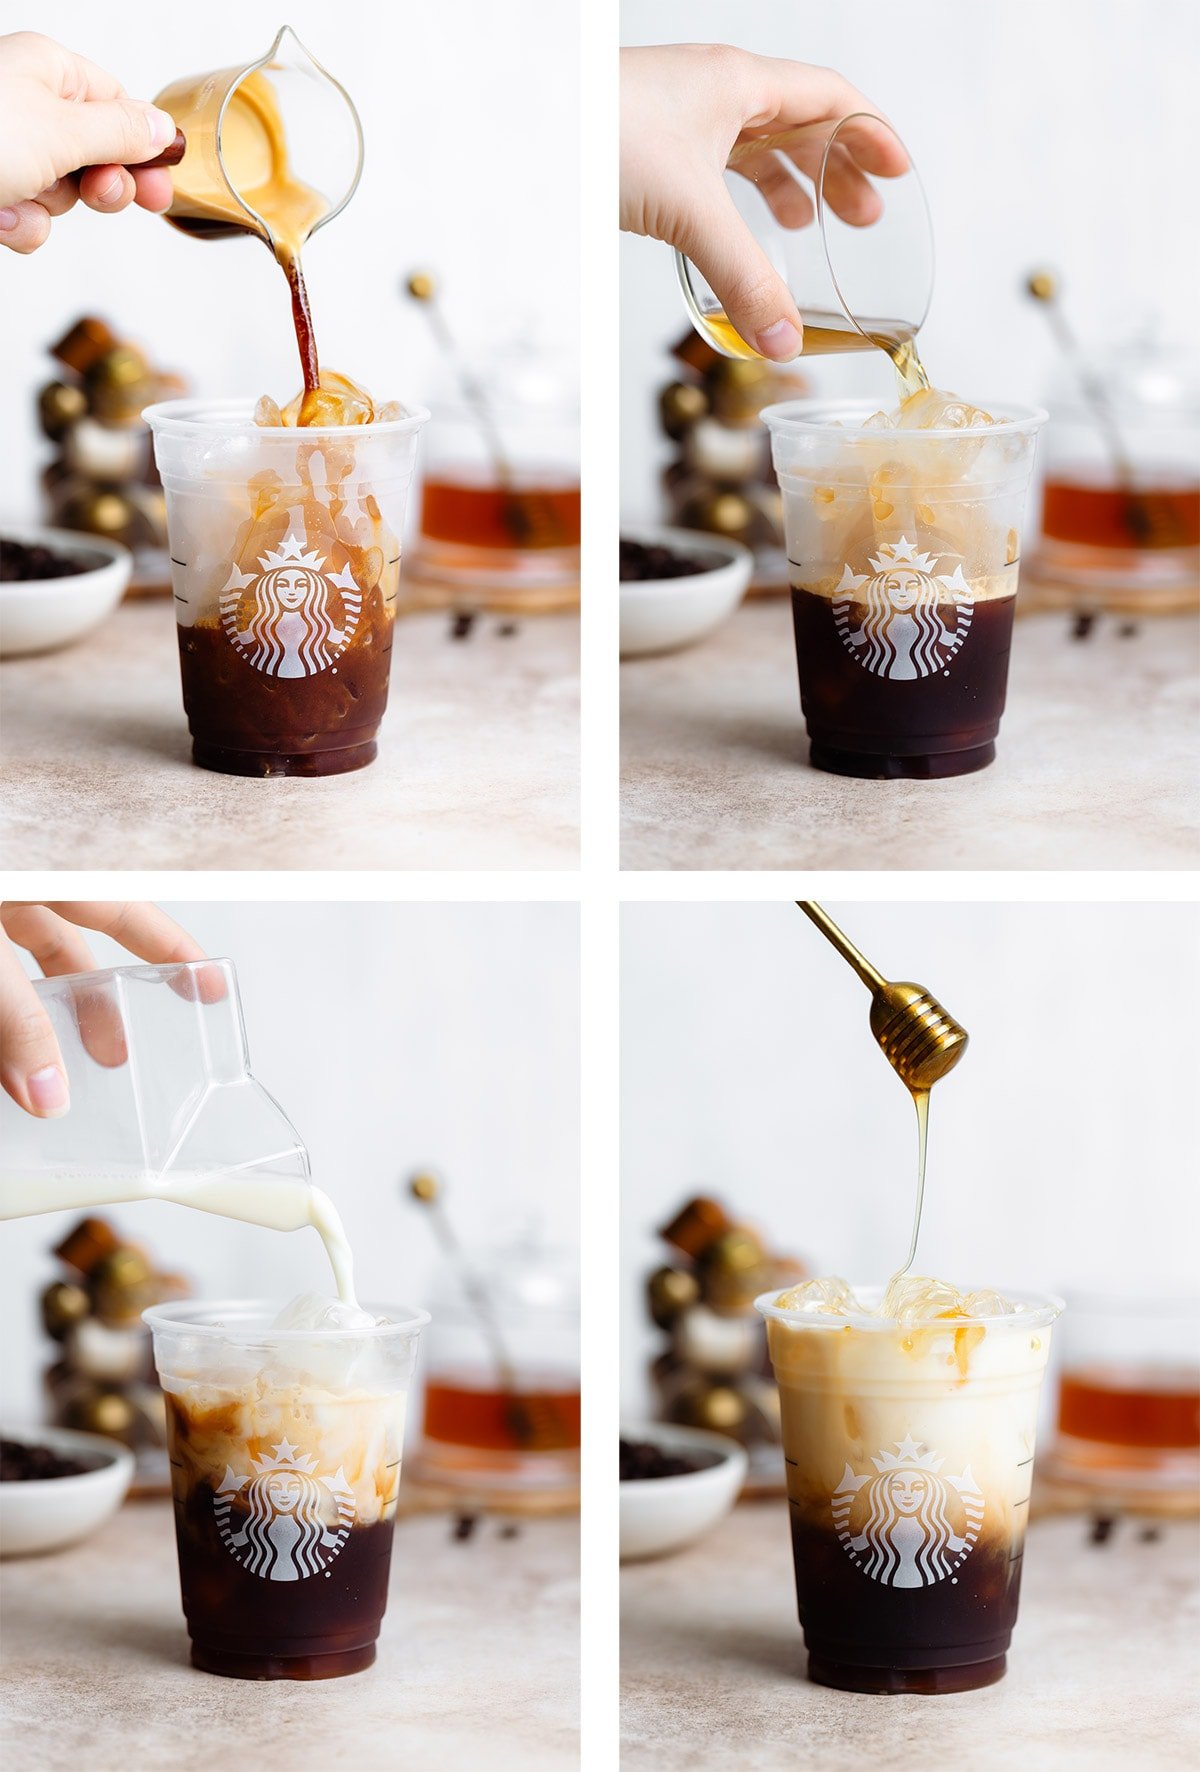 Pouring coffee, syrup, and milk over ice into a plastic Starbucks cup.